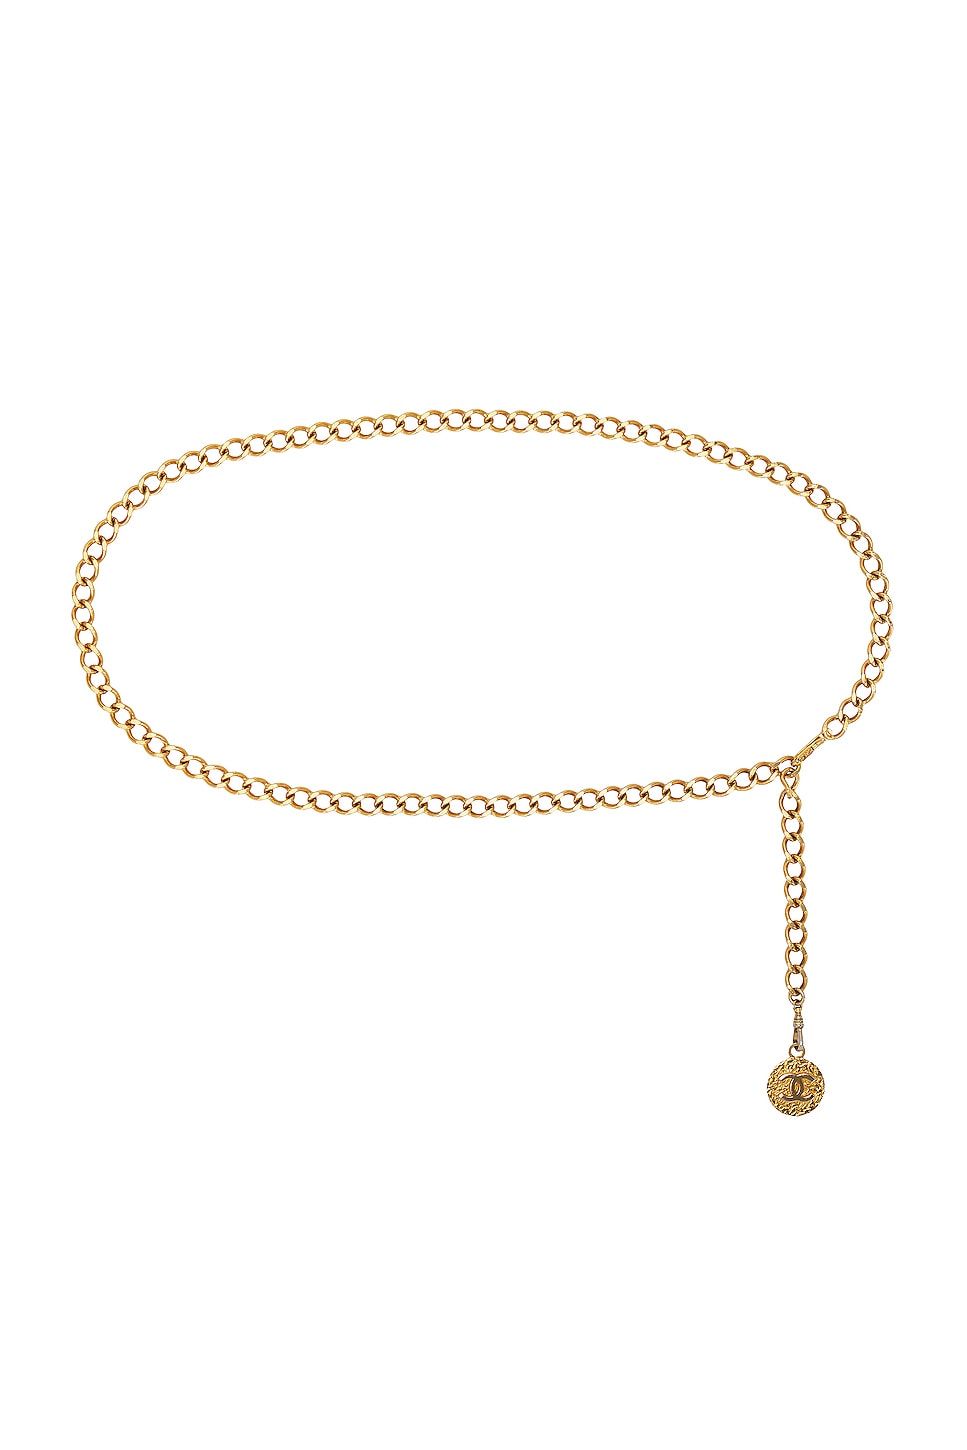 Image 1 of FWRD Renew Chanel 1982 Medallion CC Chain Belt in Gold